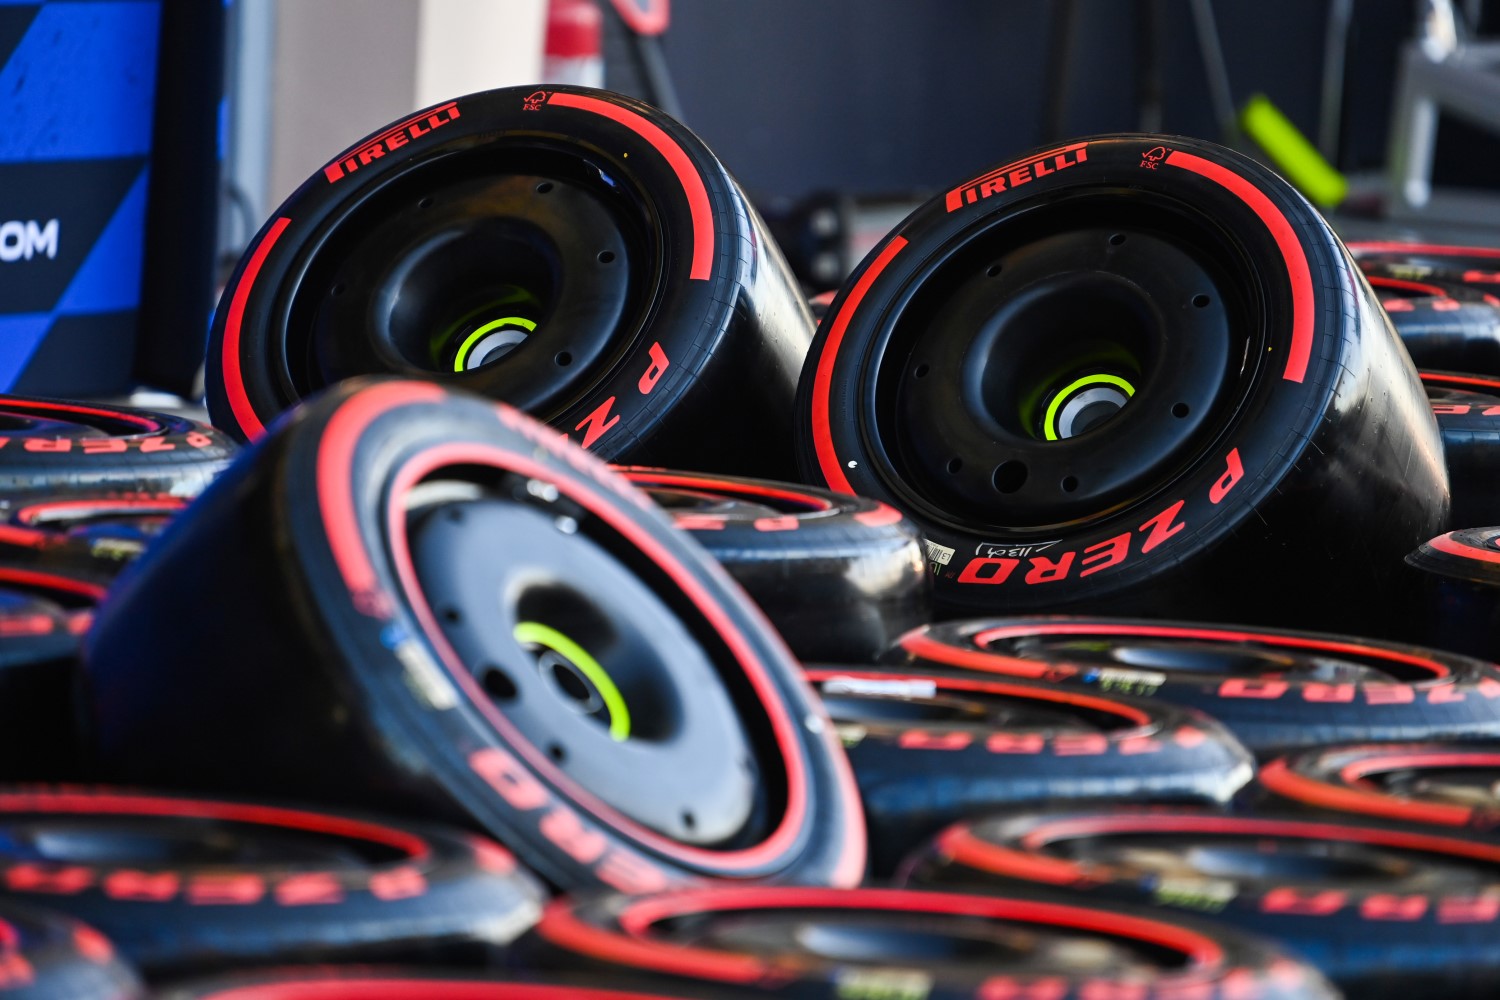 Pirelli tires in the paddock during the Bahrain GP at Bahrain International Circuit on Tuesday February 27, 2024 in Sakhir, Bahrain. (Photo by Mark Sutton / Sutton Images)